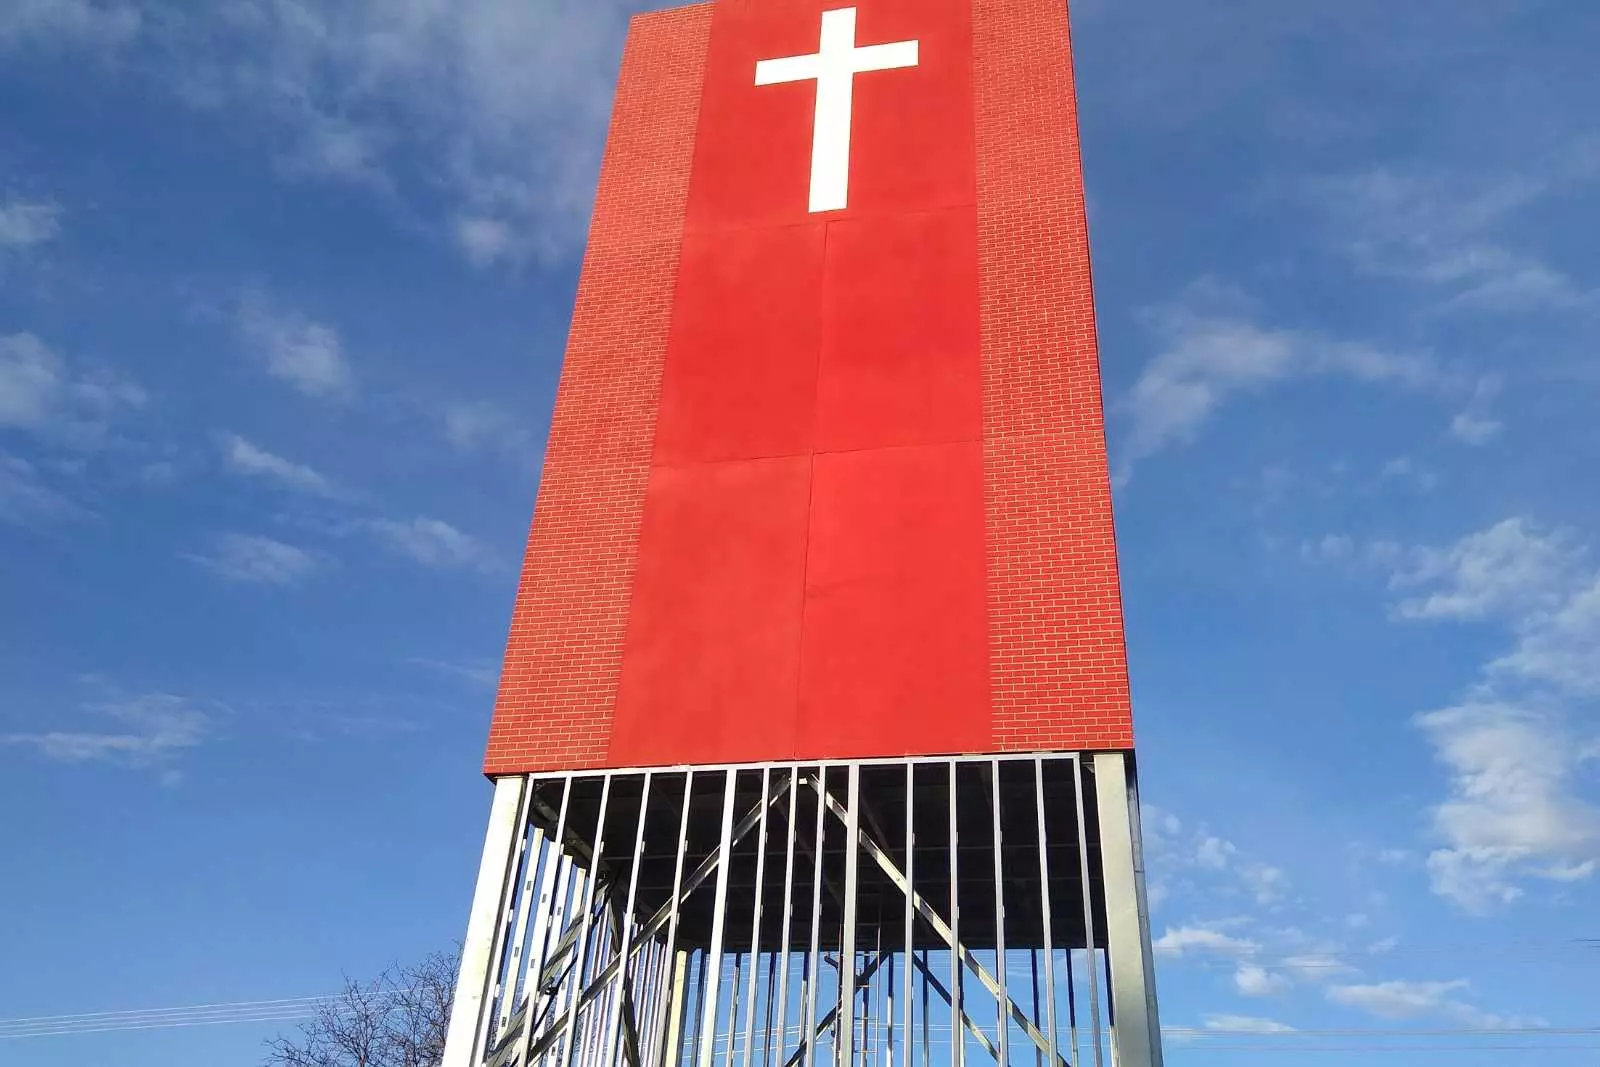 What's the Deal With That Big 'Red Church Tower' in Loveland?